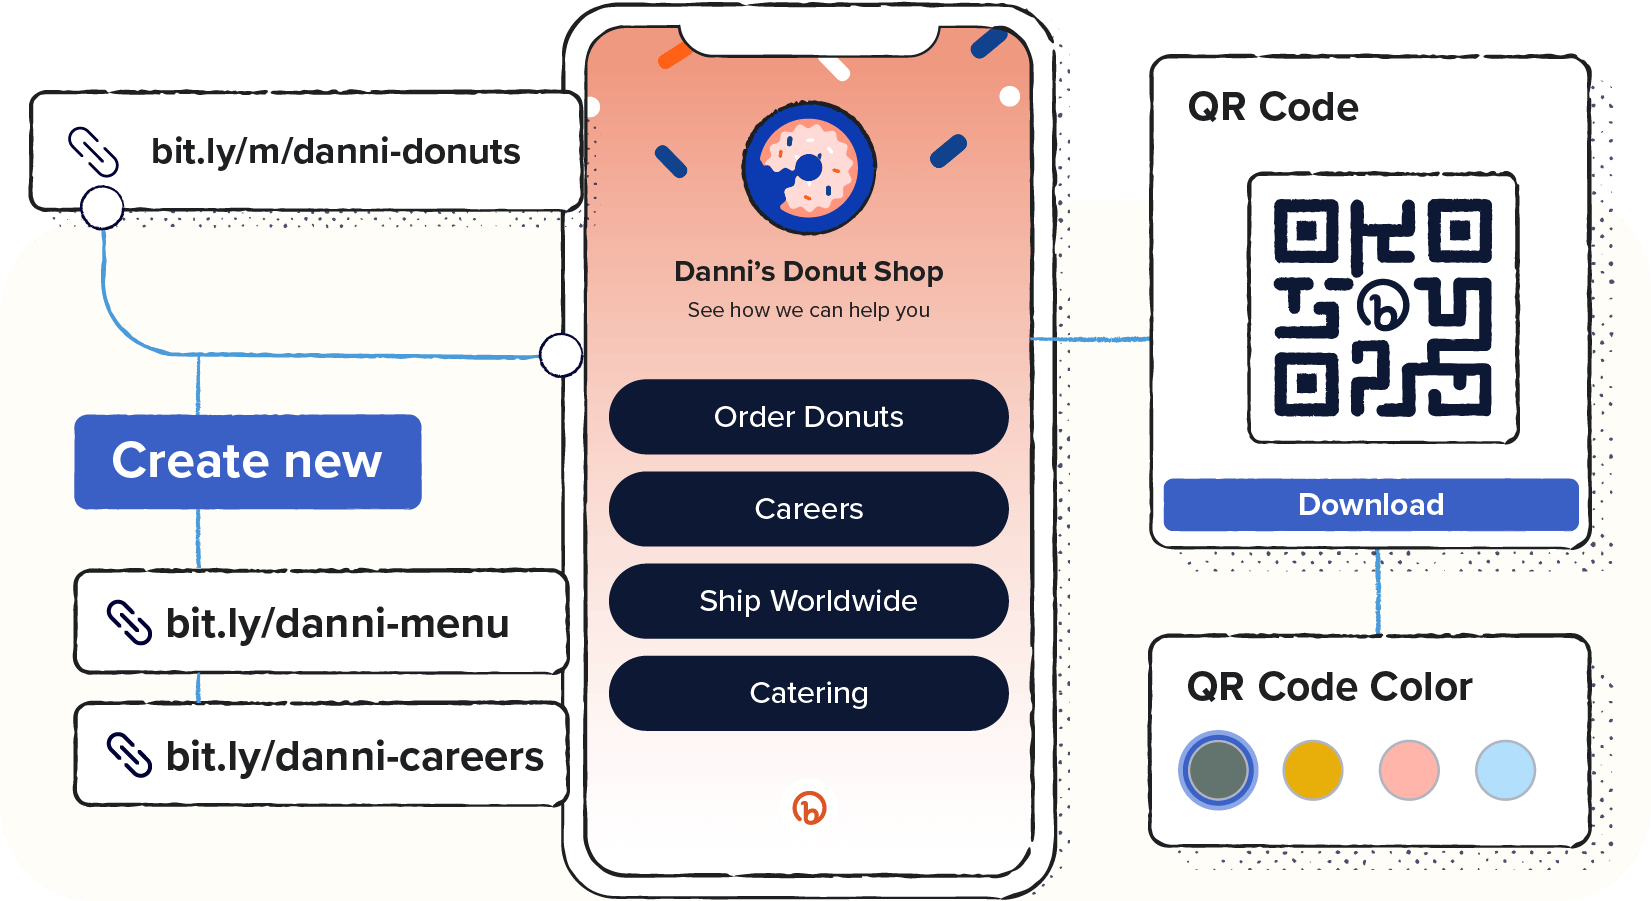 Bitly's Pages interface on a smartphone displays Danni's Donut Shop's drop-down menu, shortened links, and a QR Code with three featured colors.